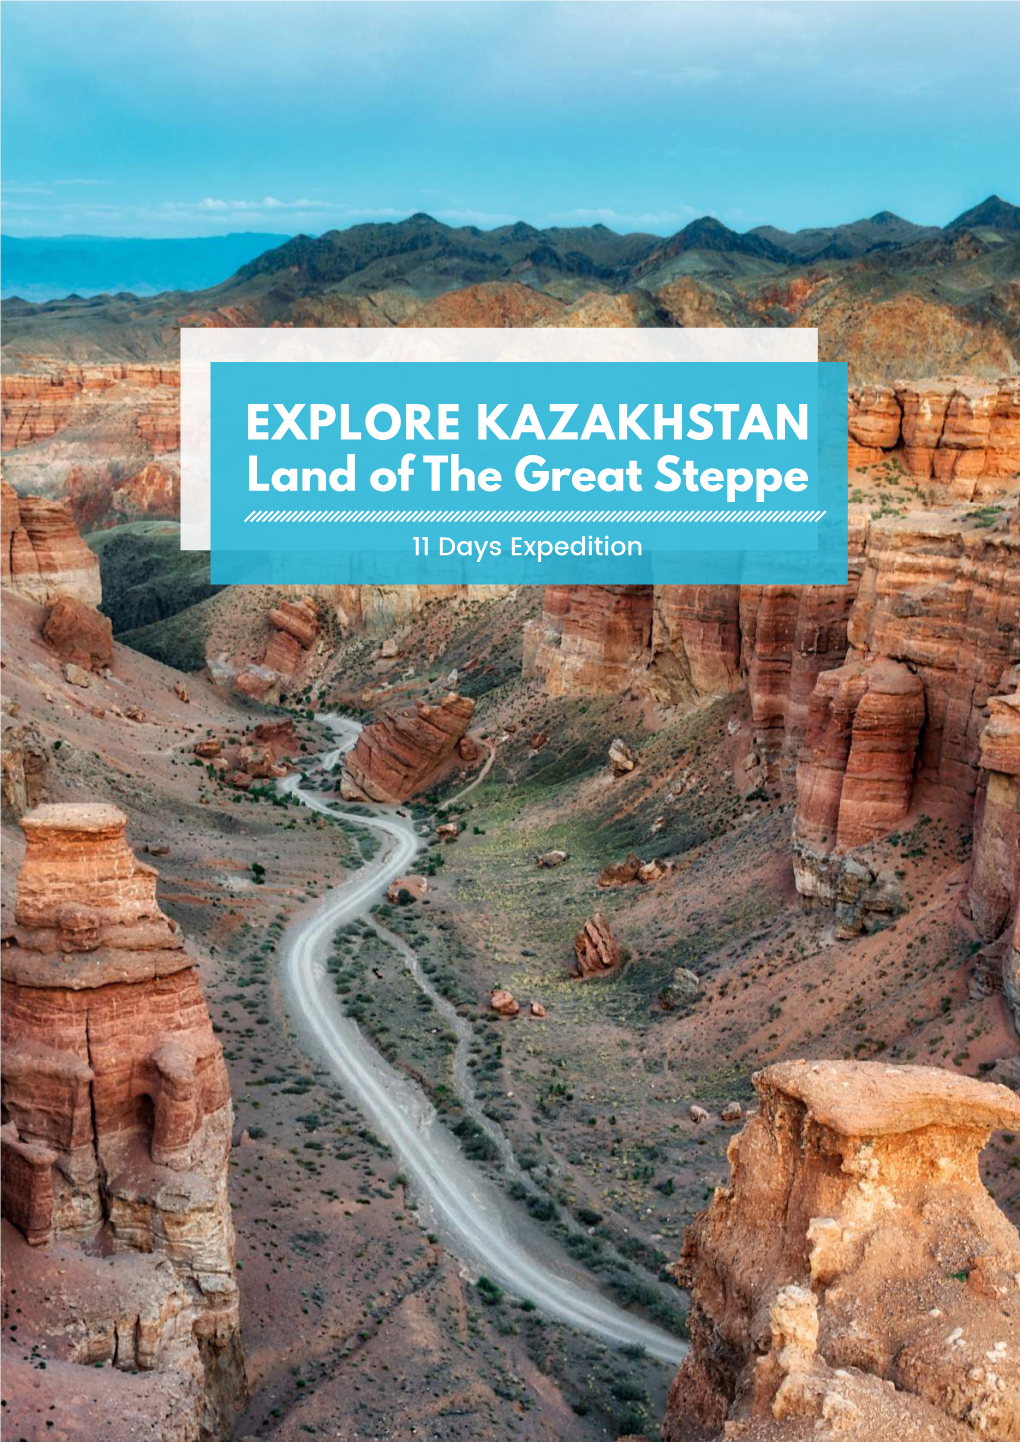 EXPLORE KAZAKHSTAN Land of the Great Steppe